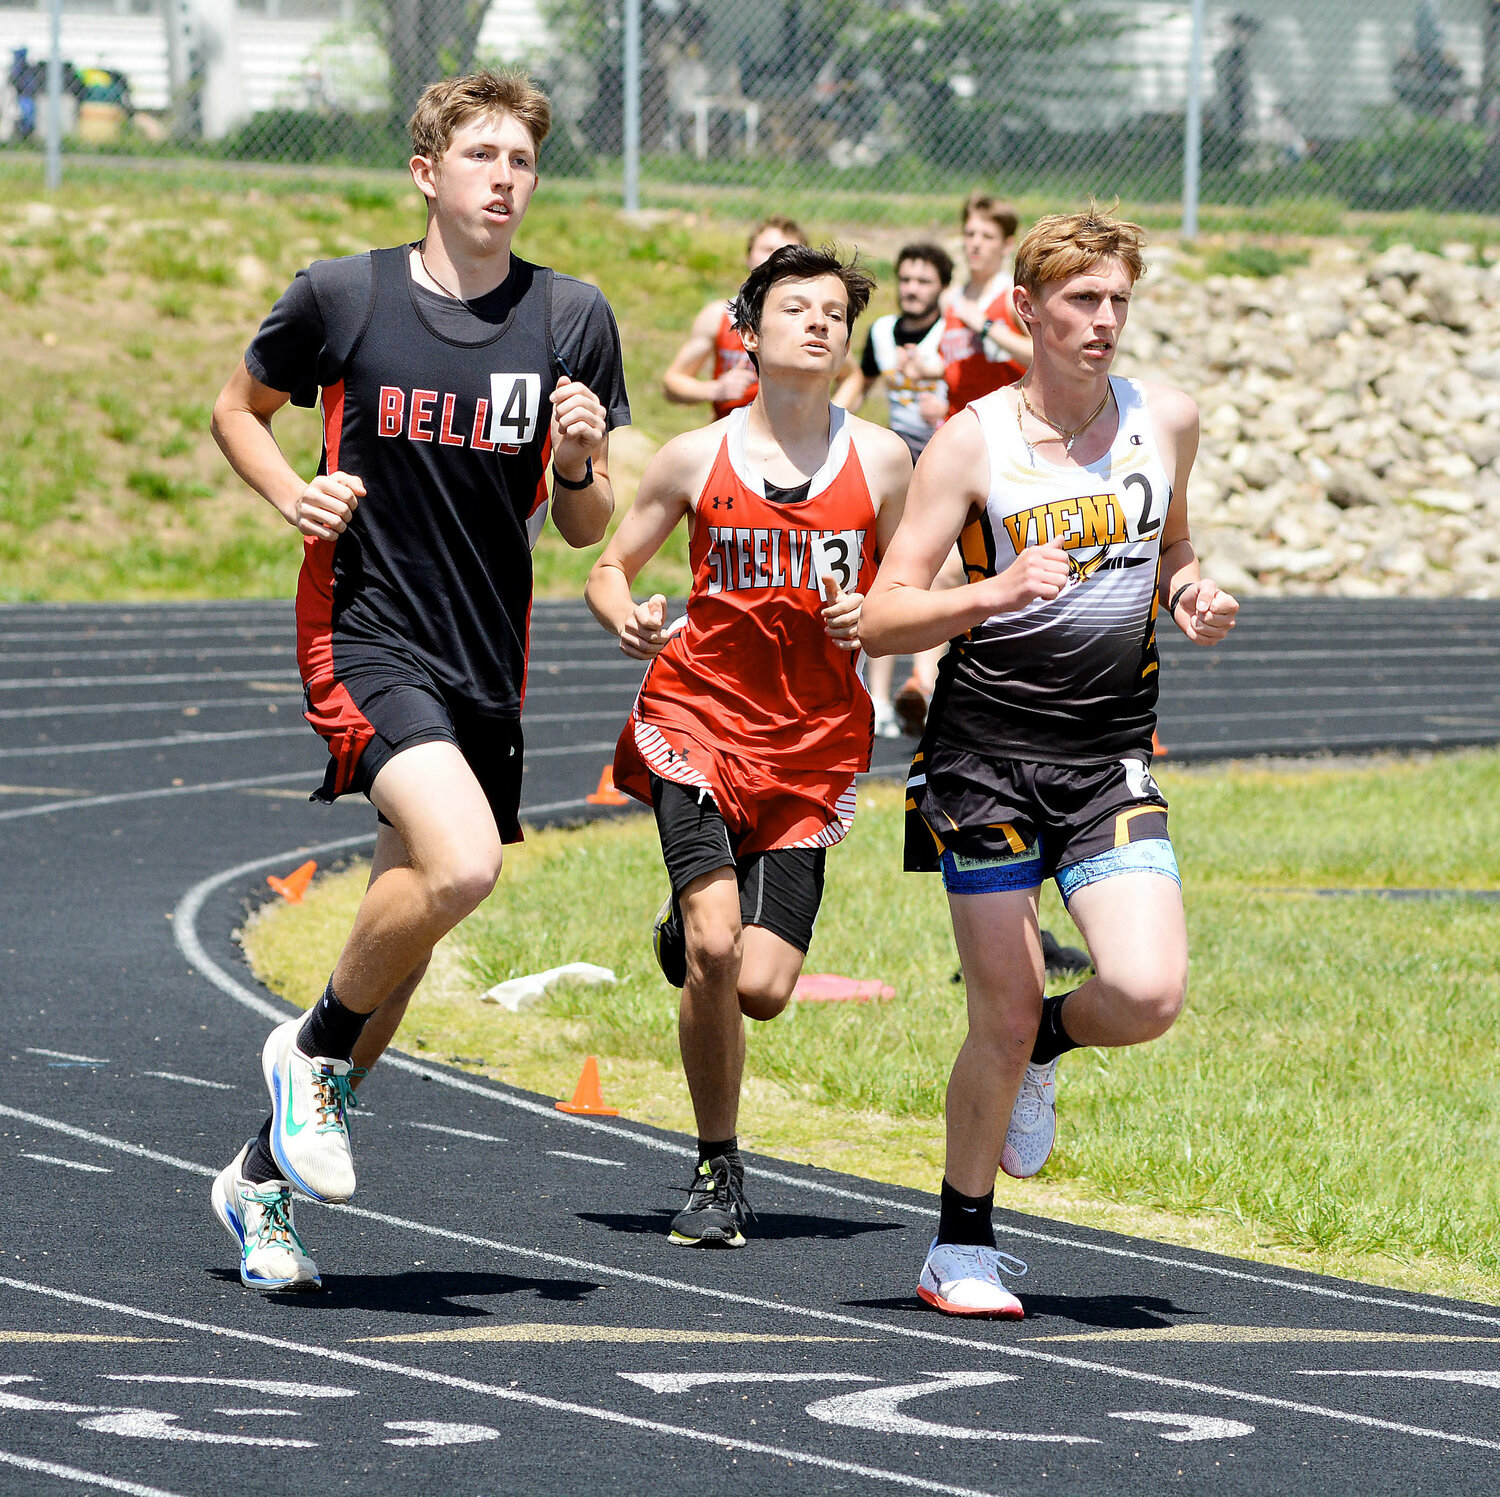 Baylar Smith (far left) and Cooper Auten (below, far right) represent Maries County in the boys 3200m run.